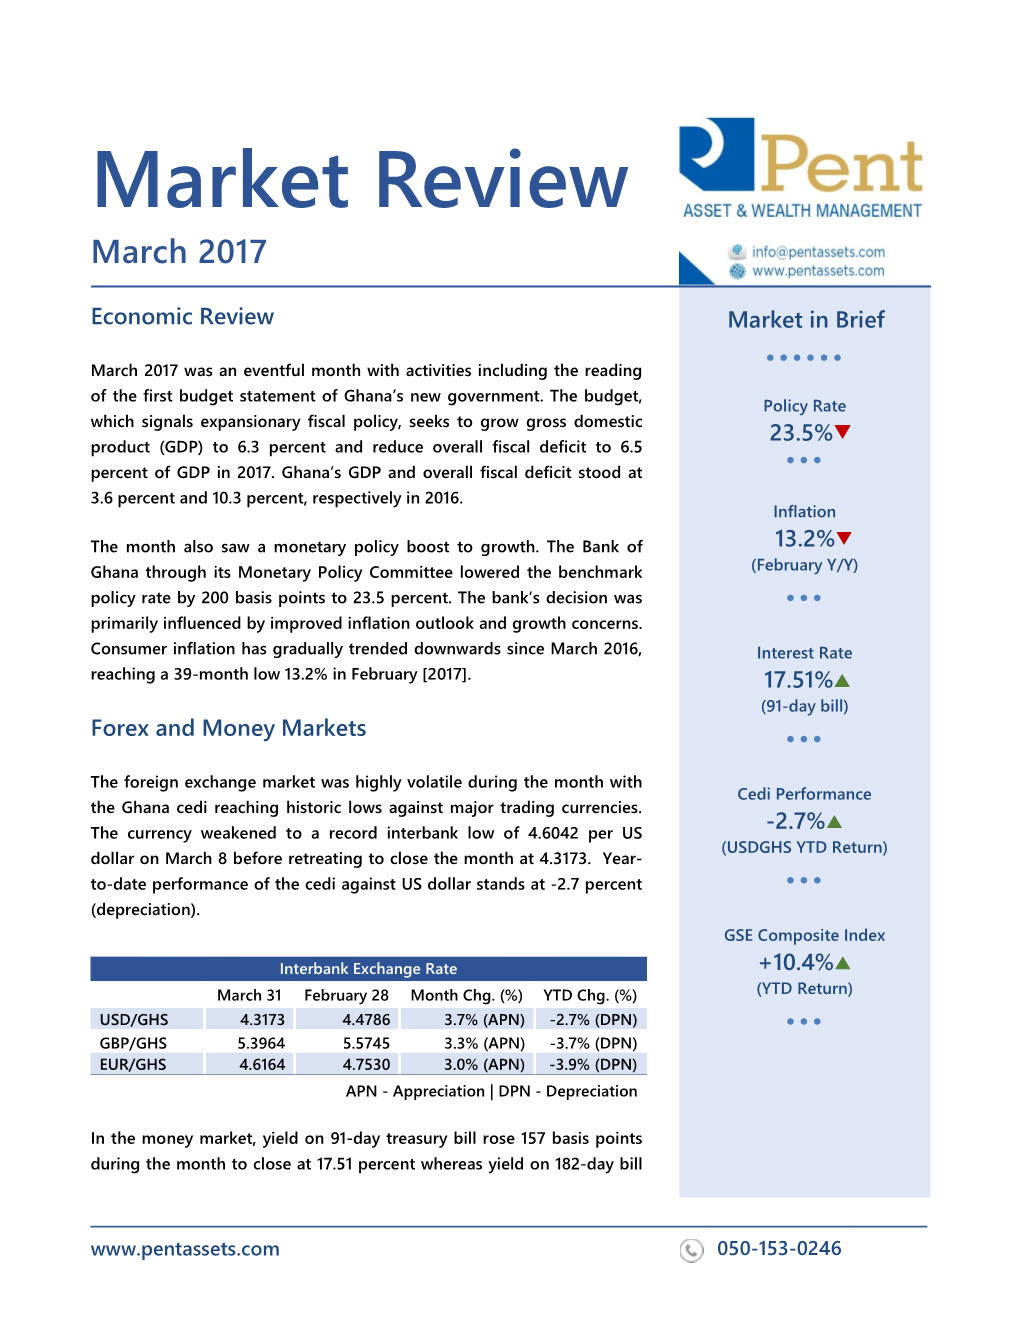 Market Review March 2017